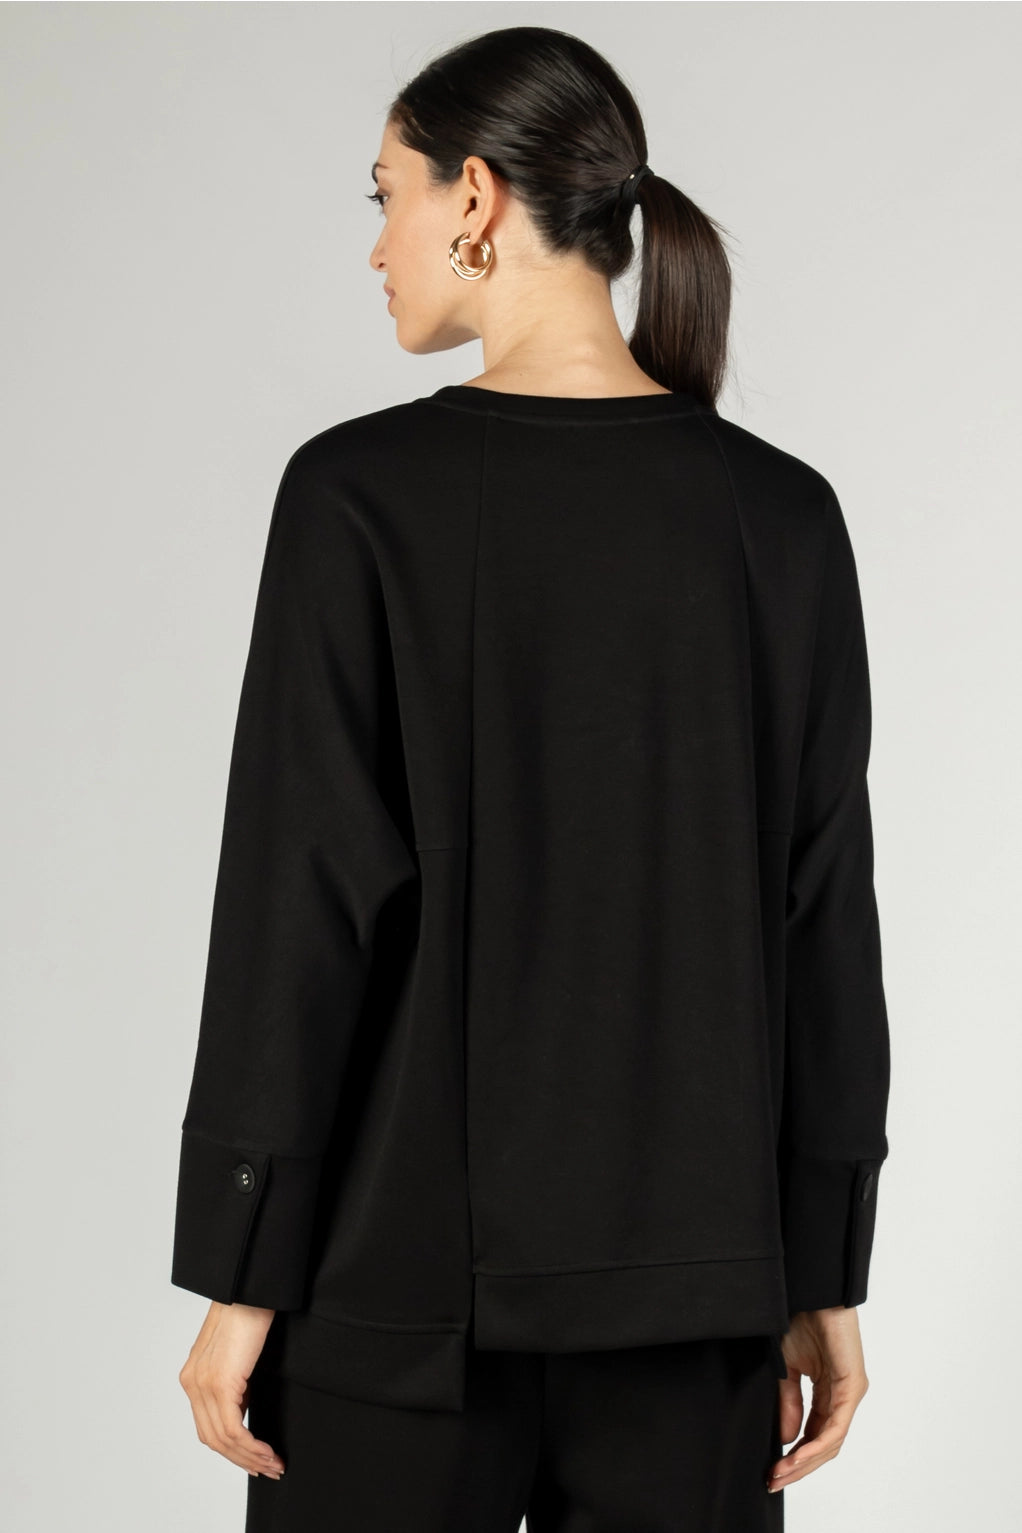 Butter Modal Dolman Sleeve Top- Two Colors